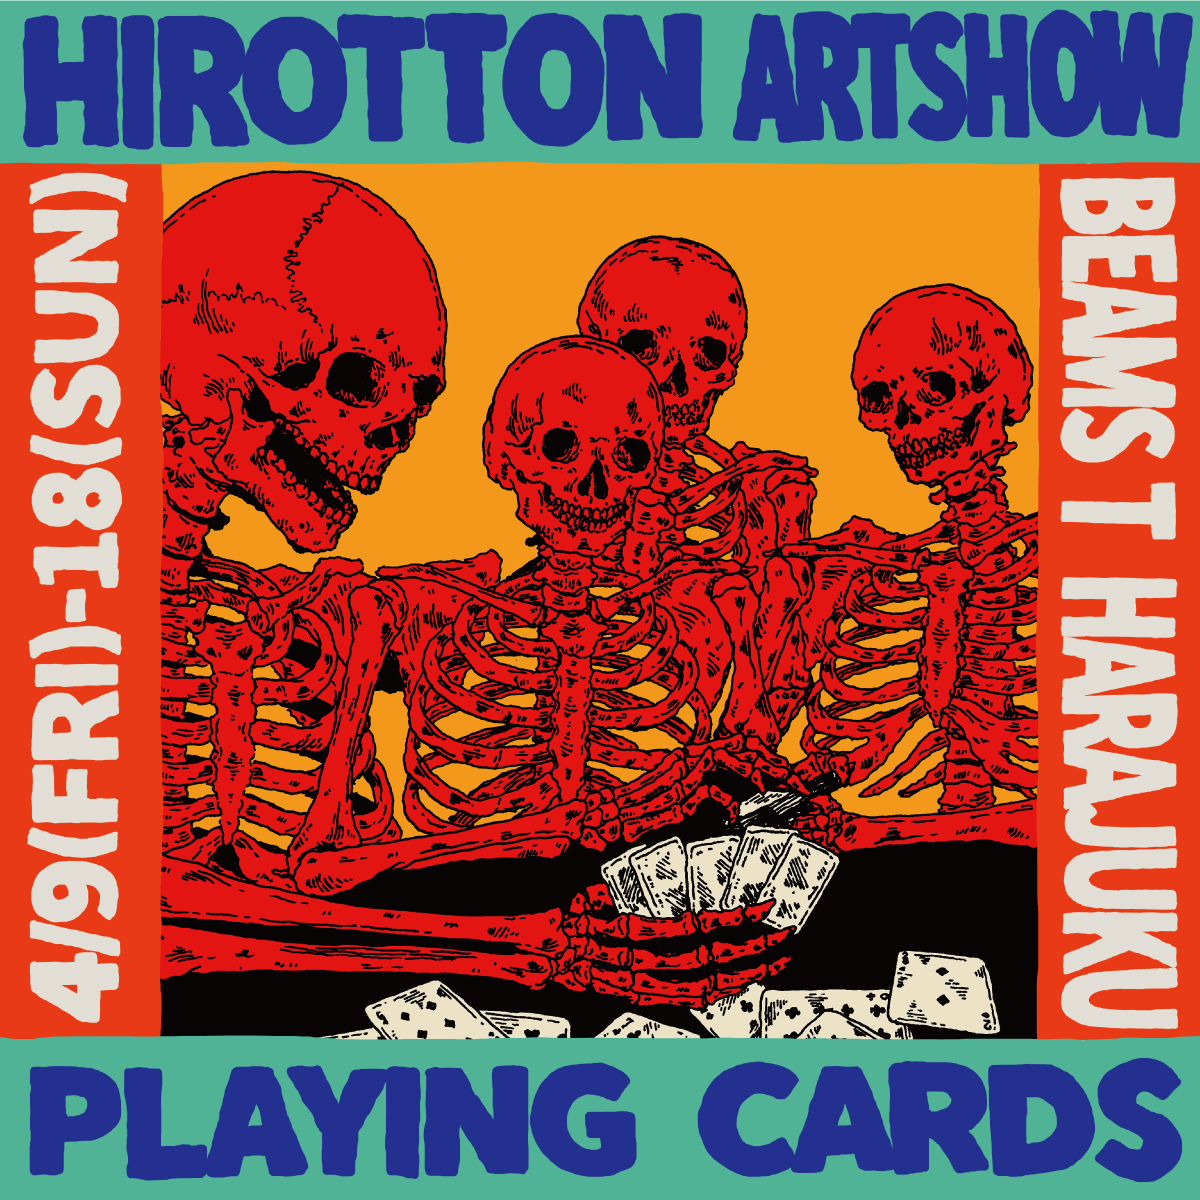 Artshow ‘PLAYING CARDS’